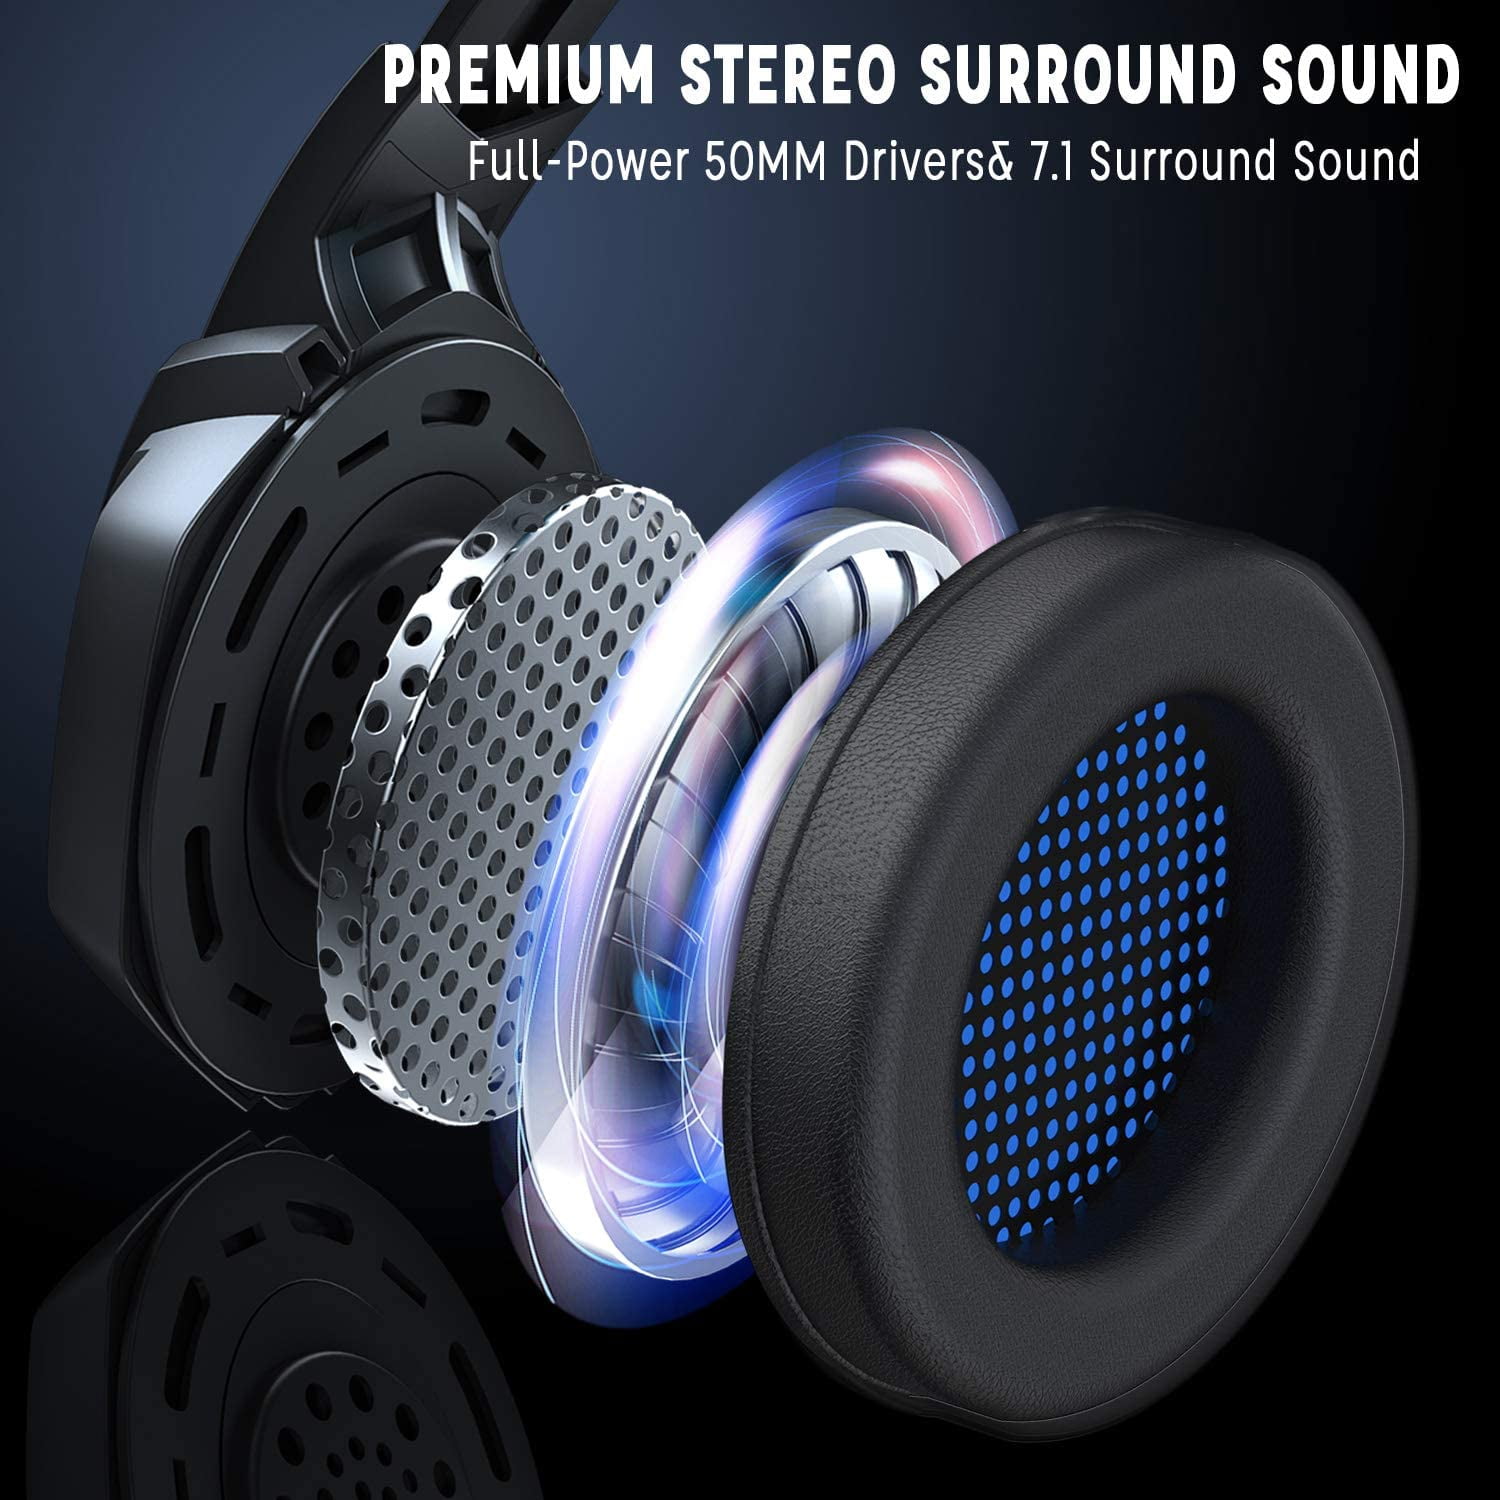 LED Blue White Surround Sound Xbox One Noise Cancelling PC Headphones with Microphone for PS4 Younux Gaming Headset Soft Earmuffs PS5 